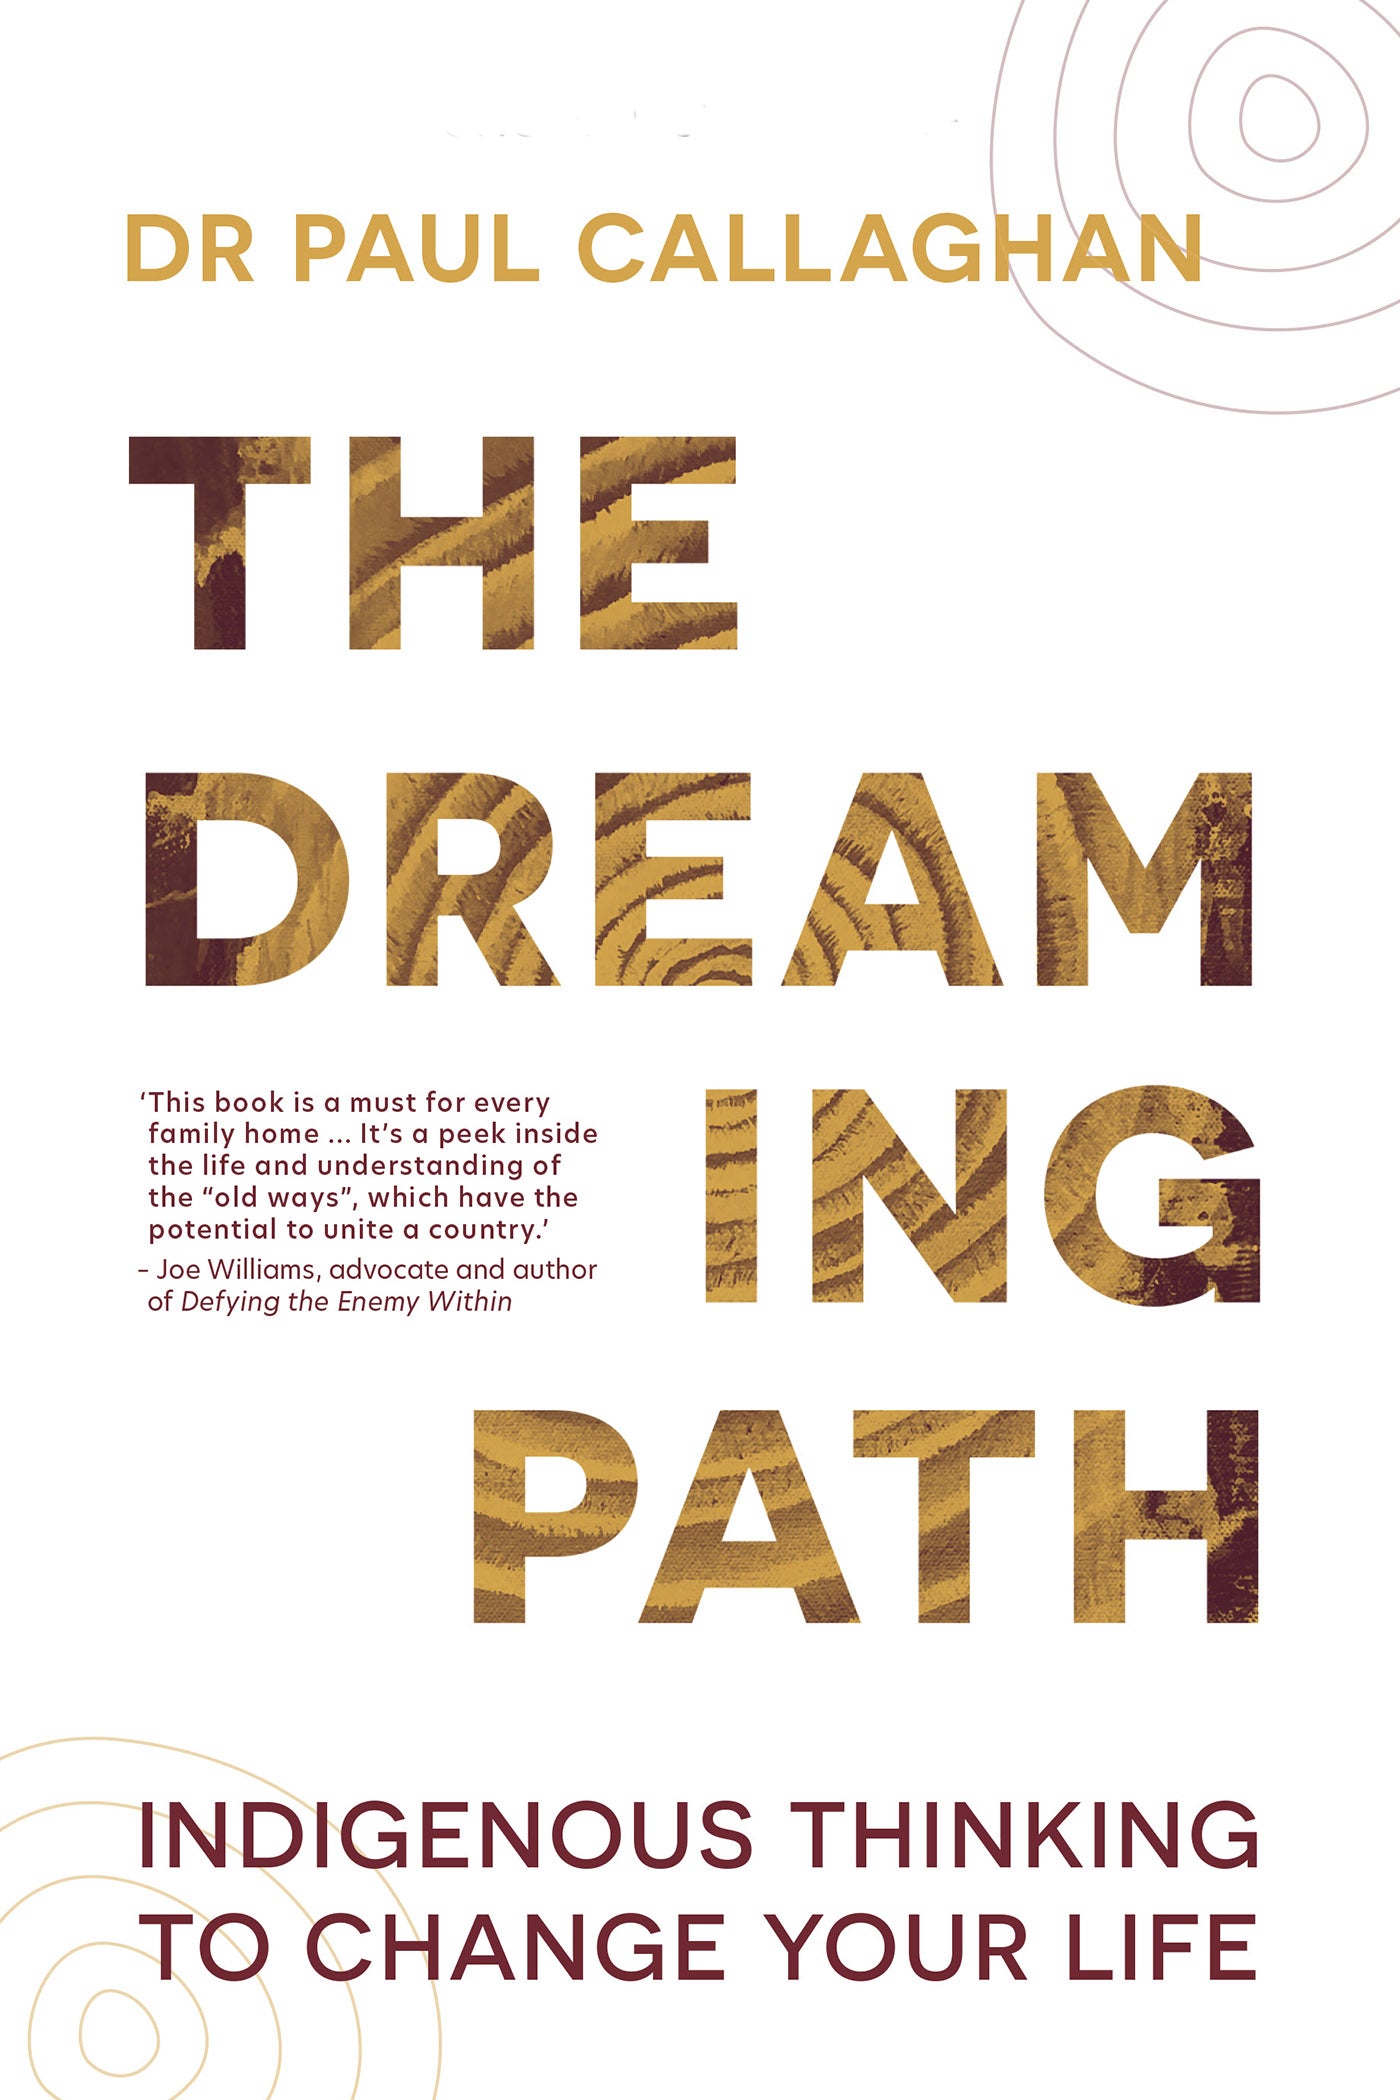 The Dreaming Path: Indigenous Thinking to Change Your Life by Dr Paul Callaghan